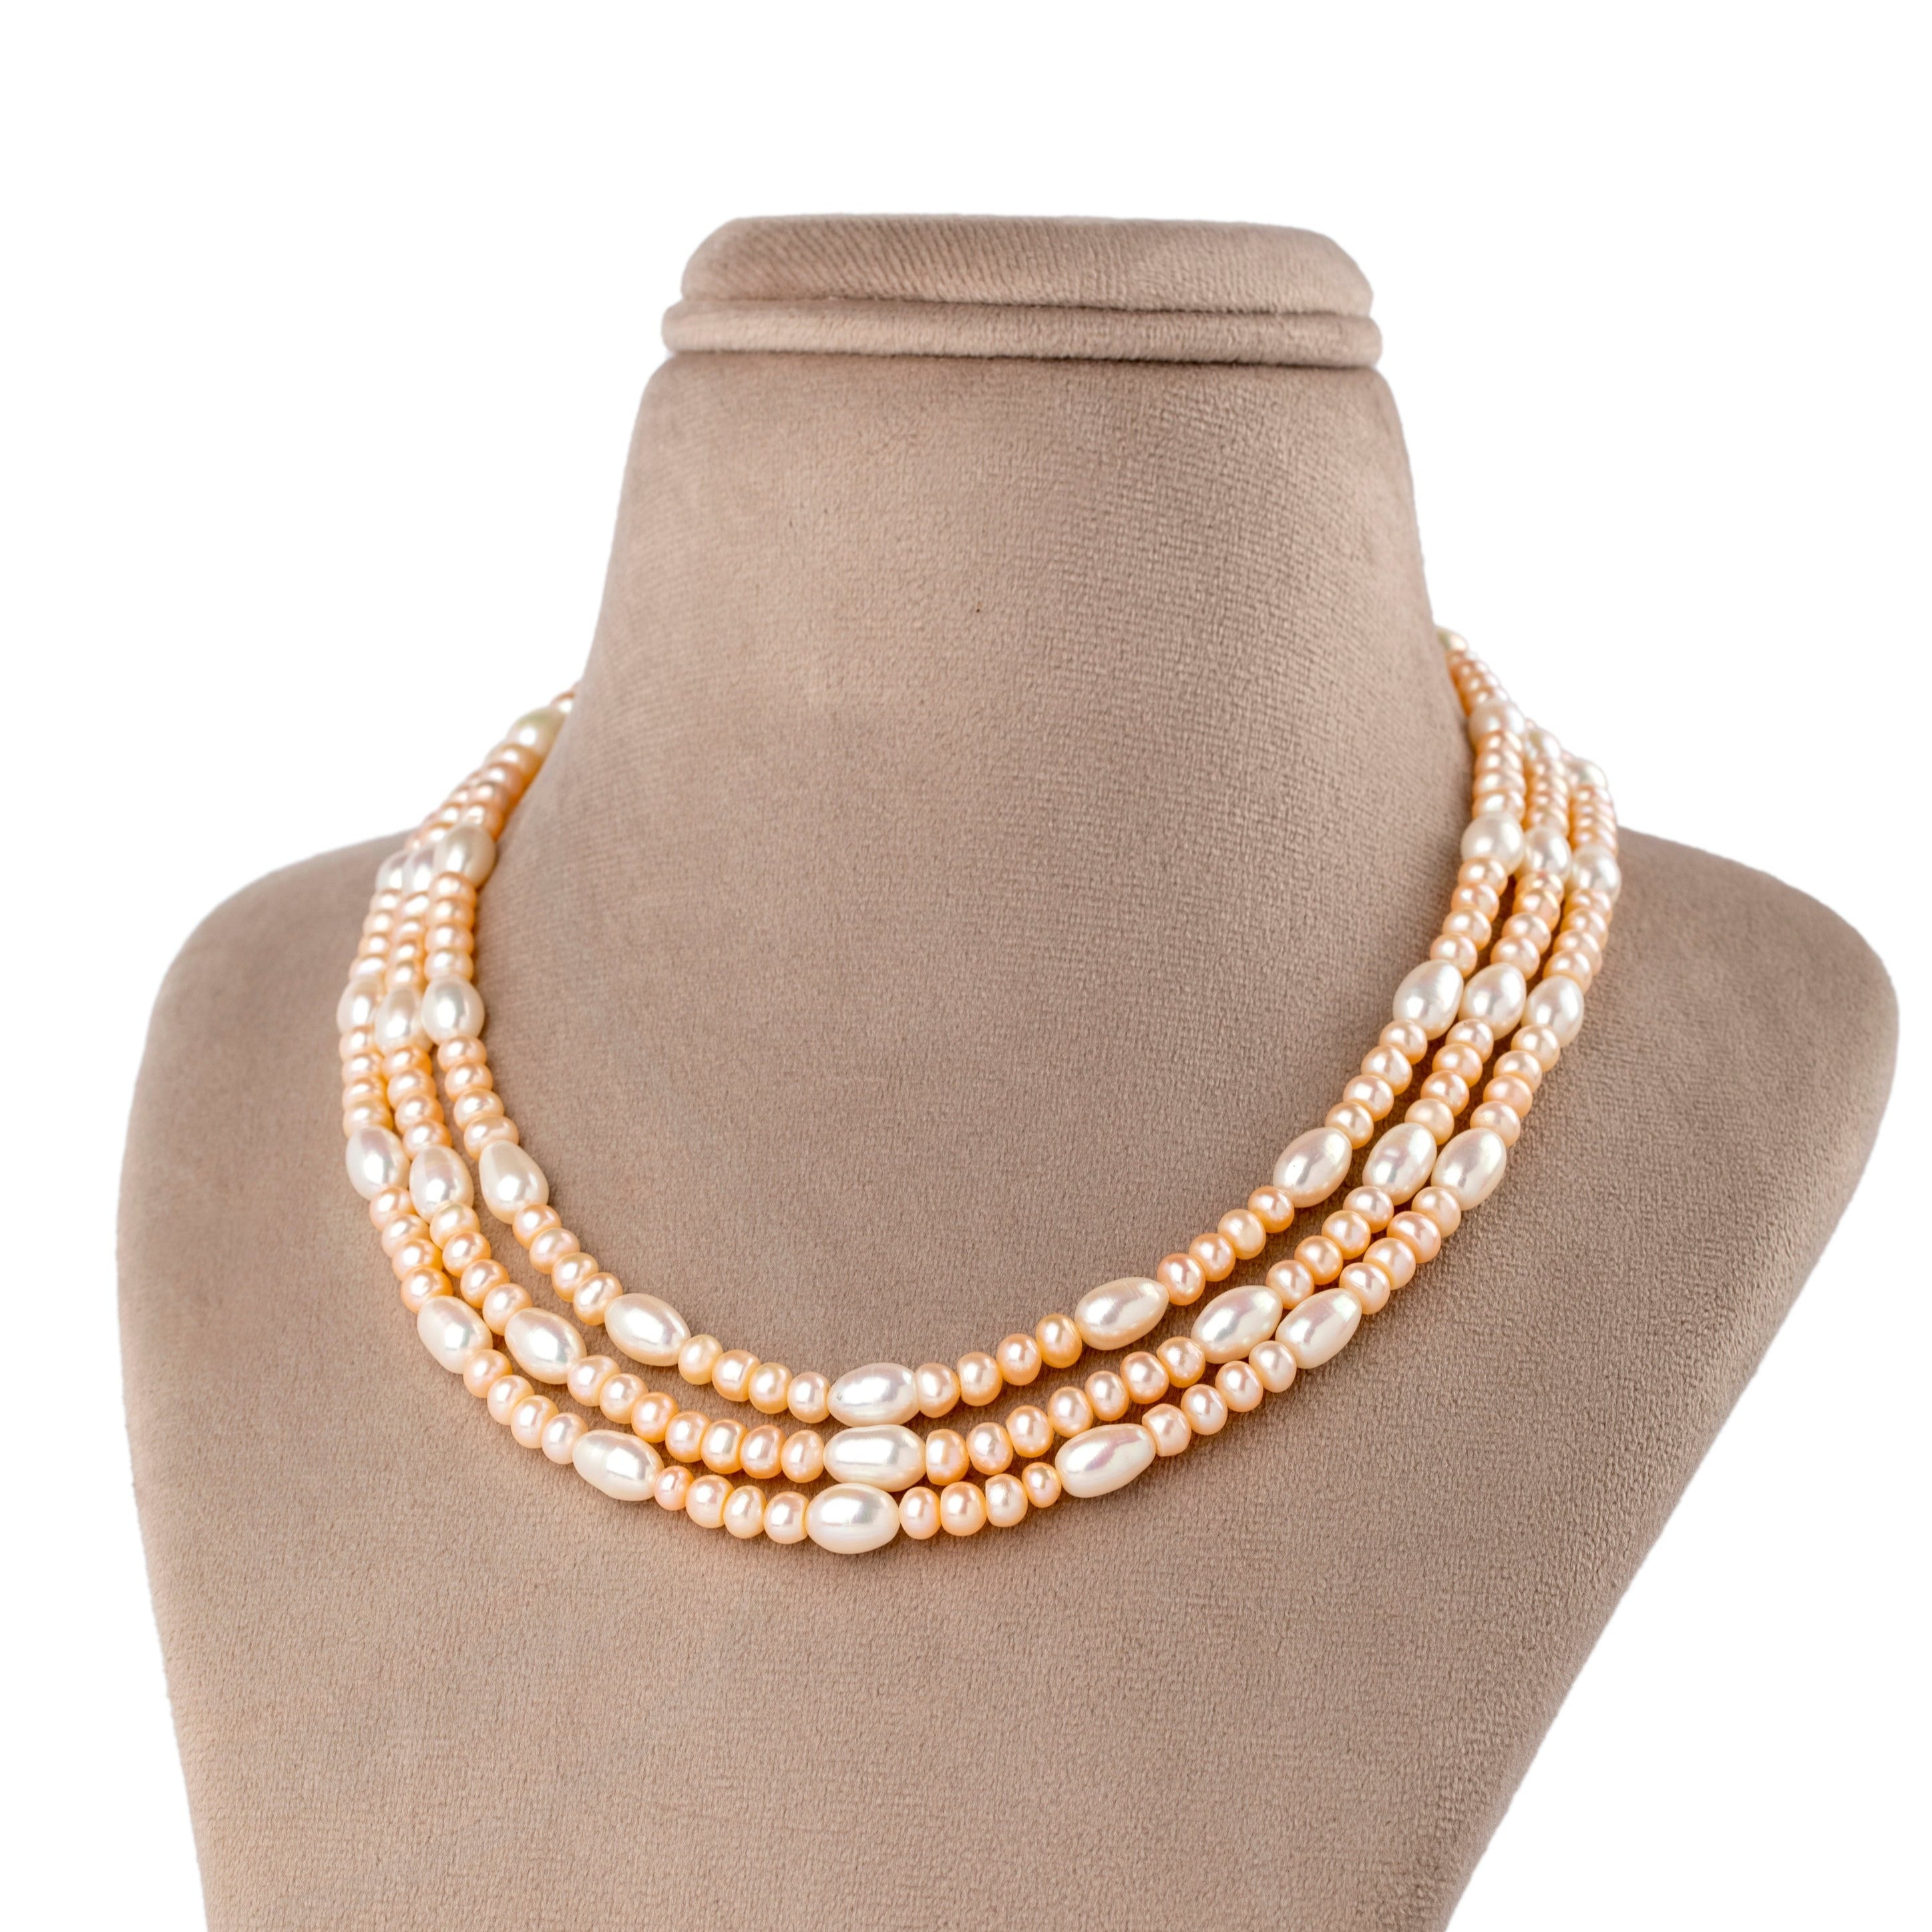 Peach Whisper 3 Row Freshwater Pearl Necklace